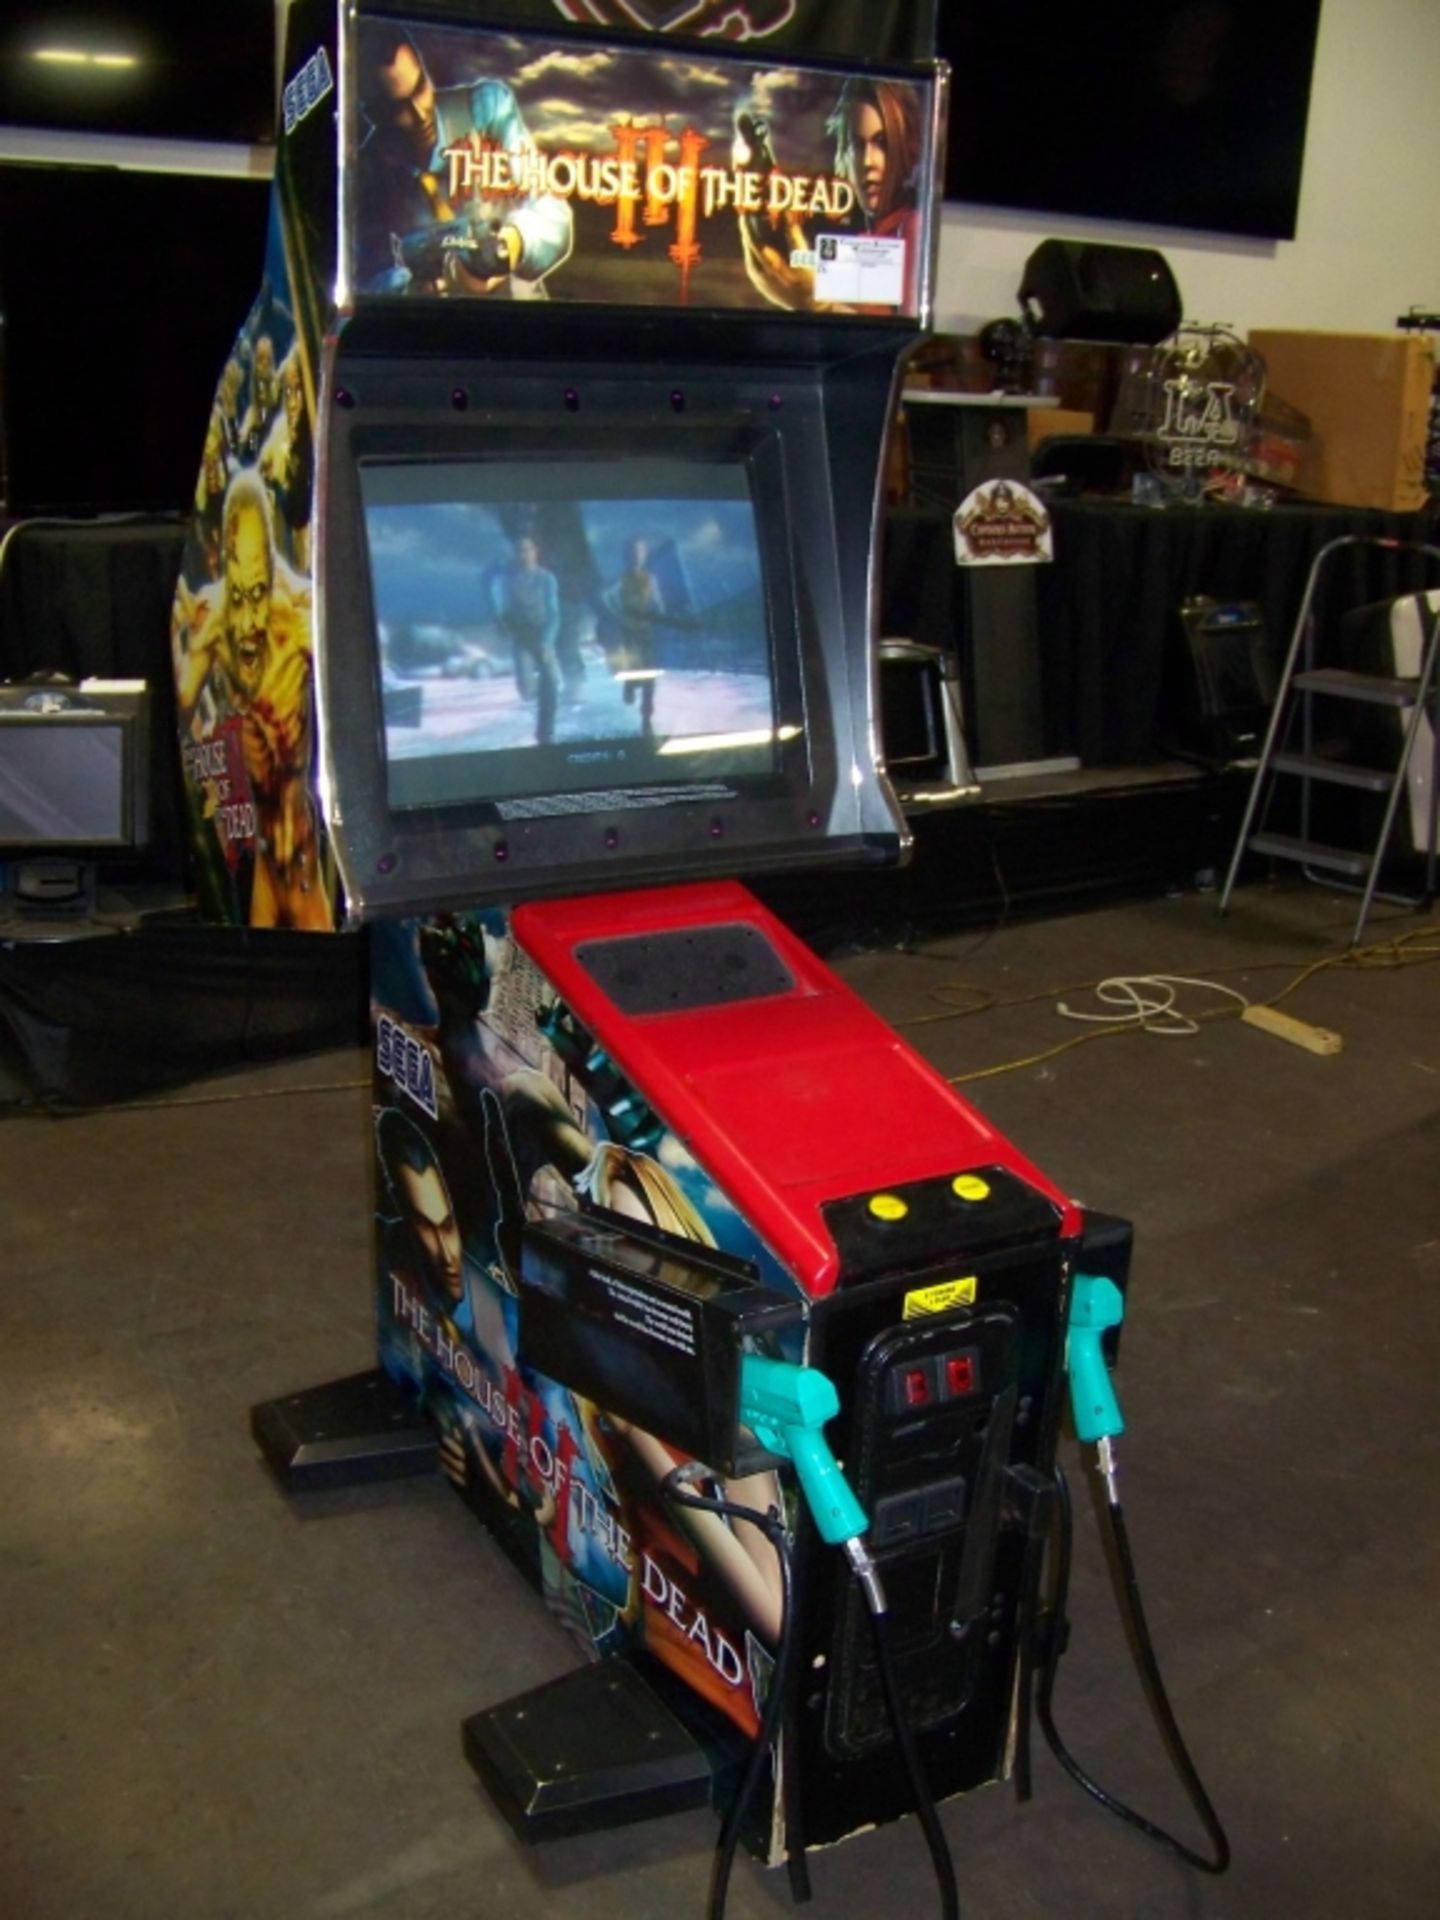 THE HOUSE OF THE DEAD III ZOMBIE SHOOTER ARCADE